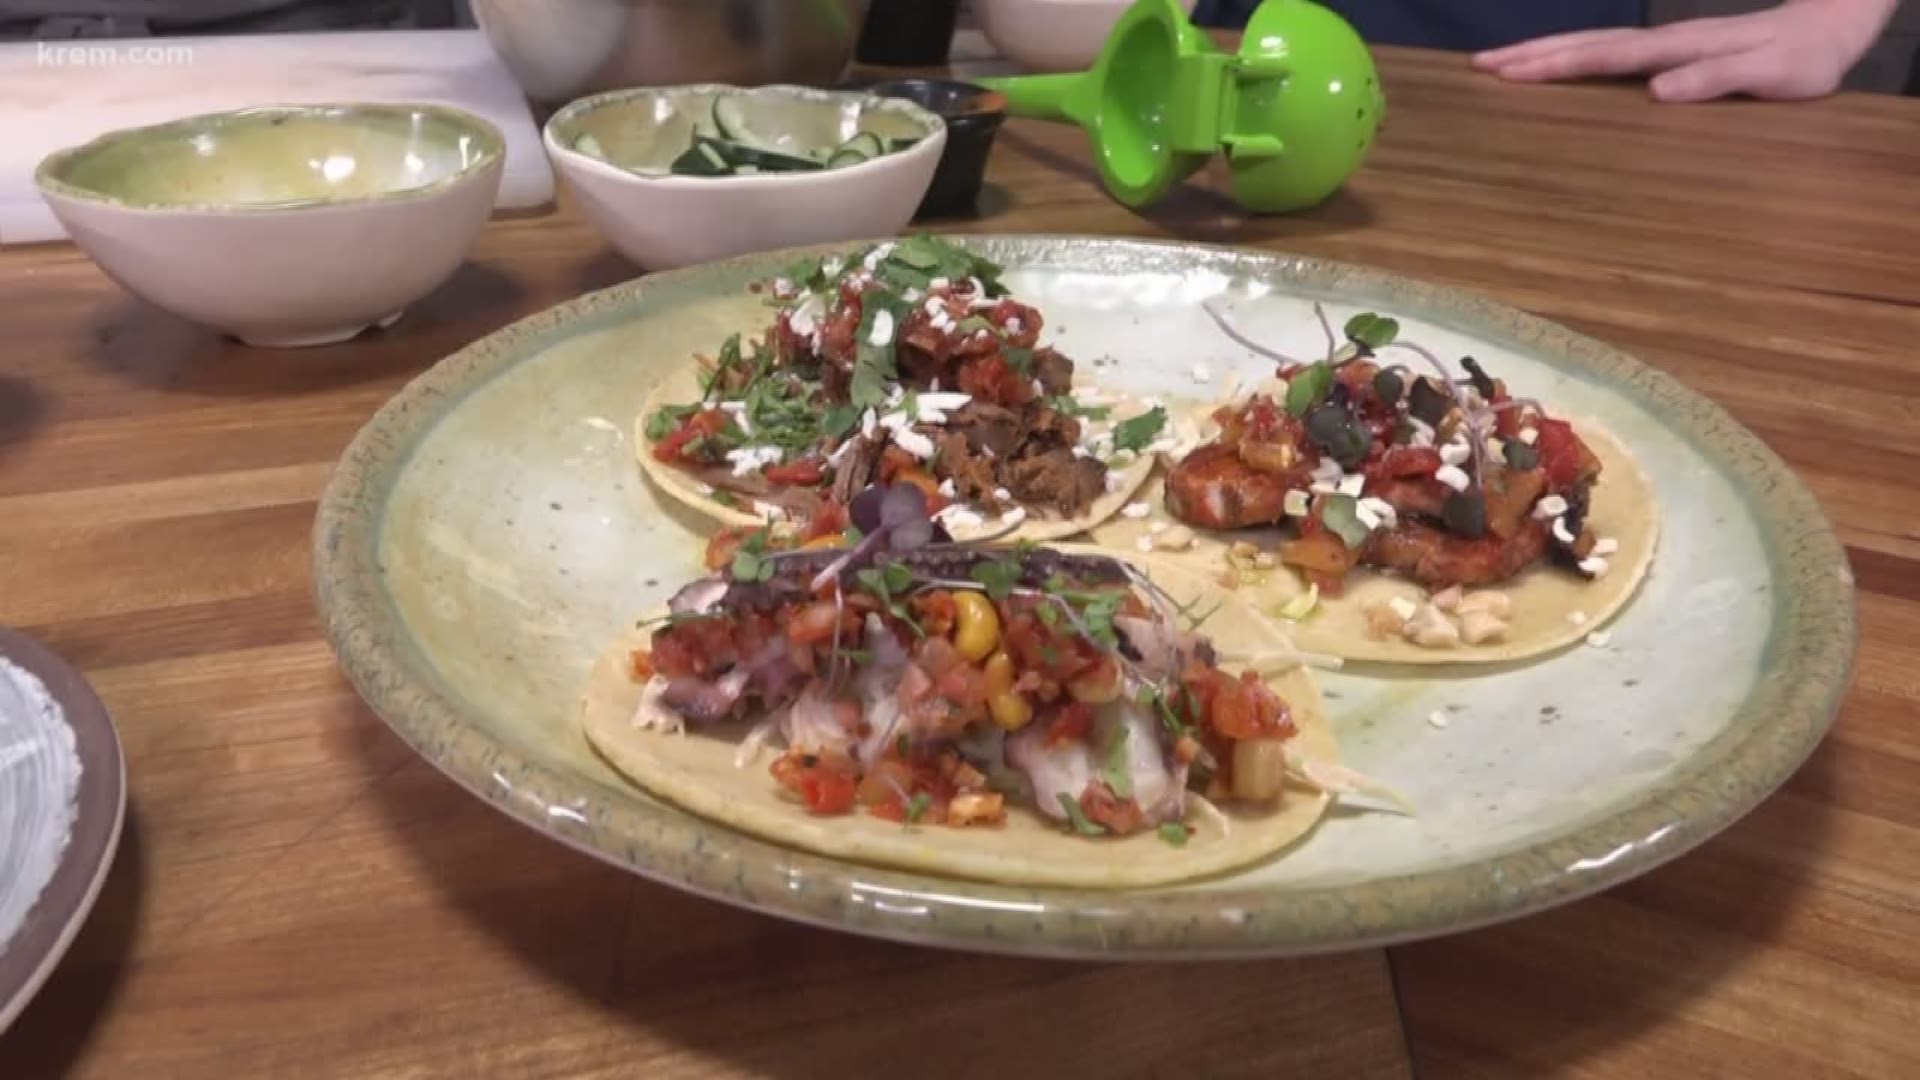 KREM's Evan Noorani and Jen York chat with Chef Travis Dickinson about the upcoming Restaurant Week menu at Cochinito Taqueria.